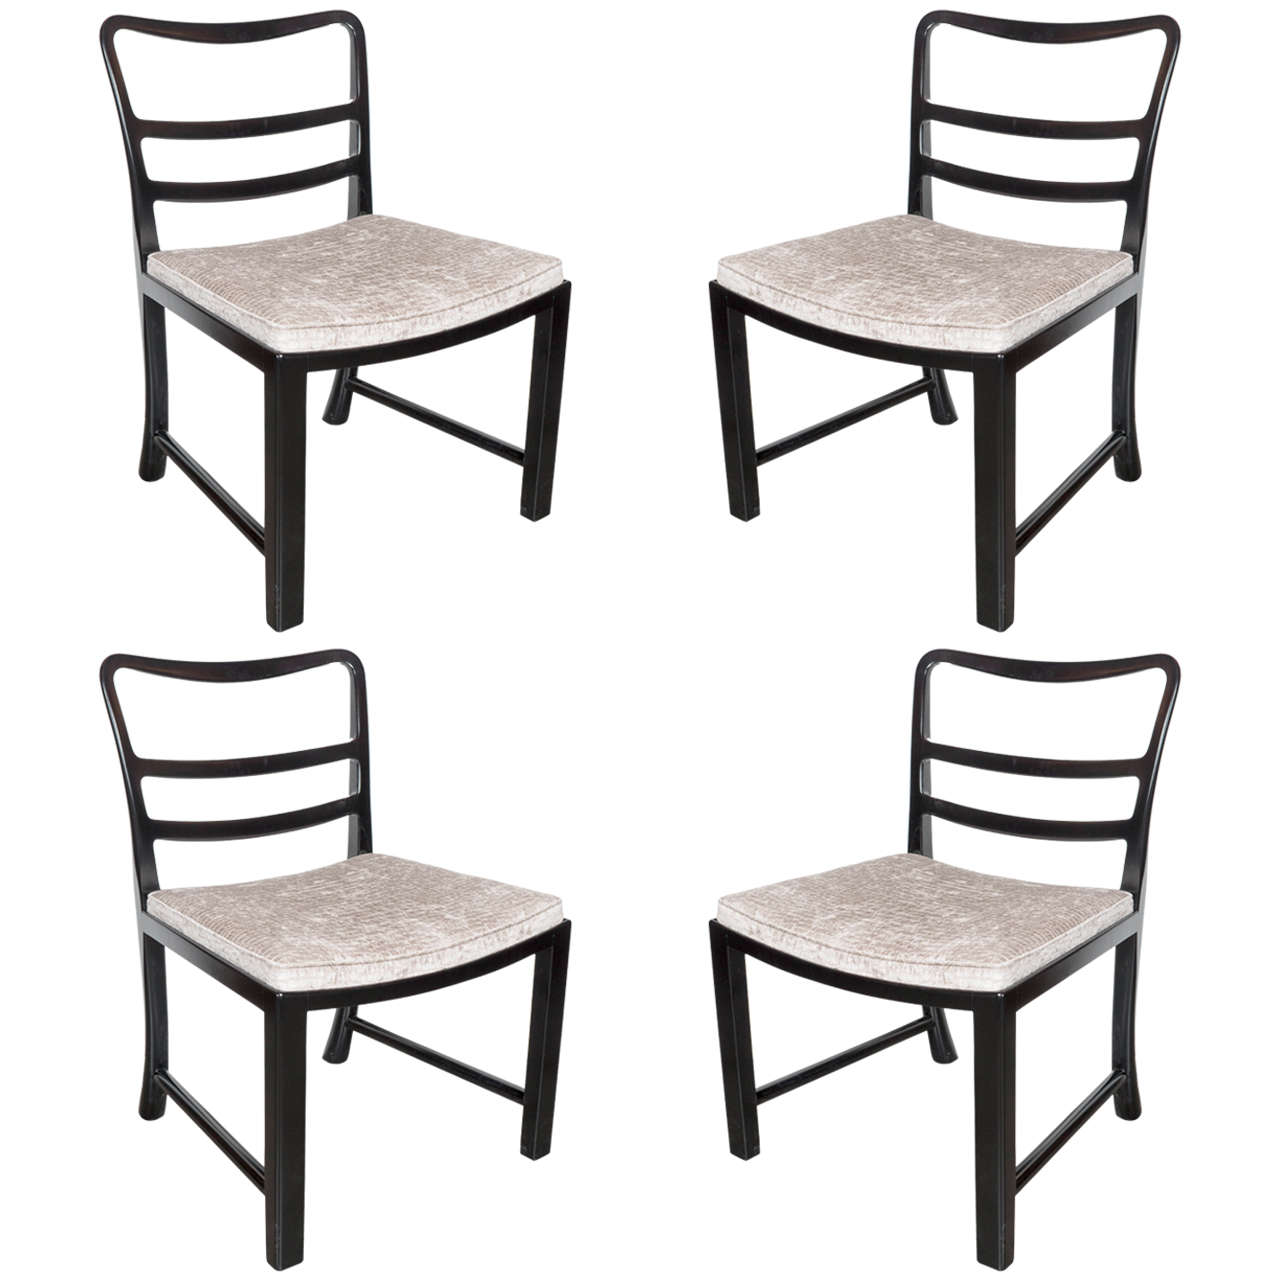 Sculptural Mid-Century Modernist Set of Four Dining Chairs By Dunbar